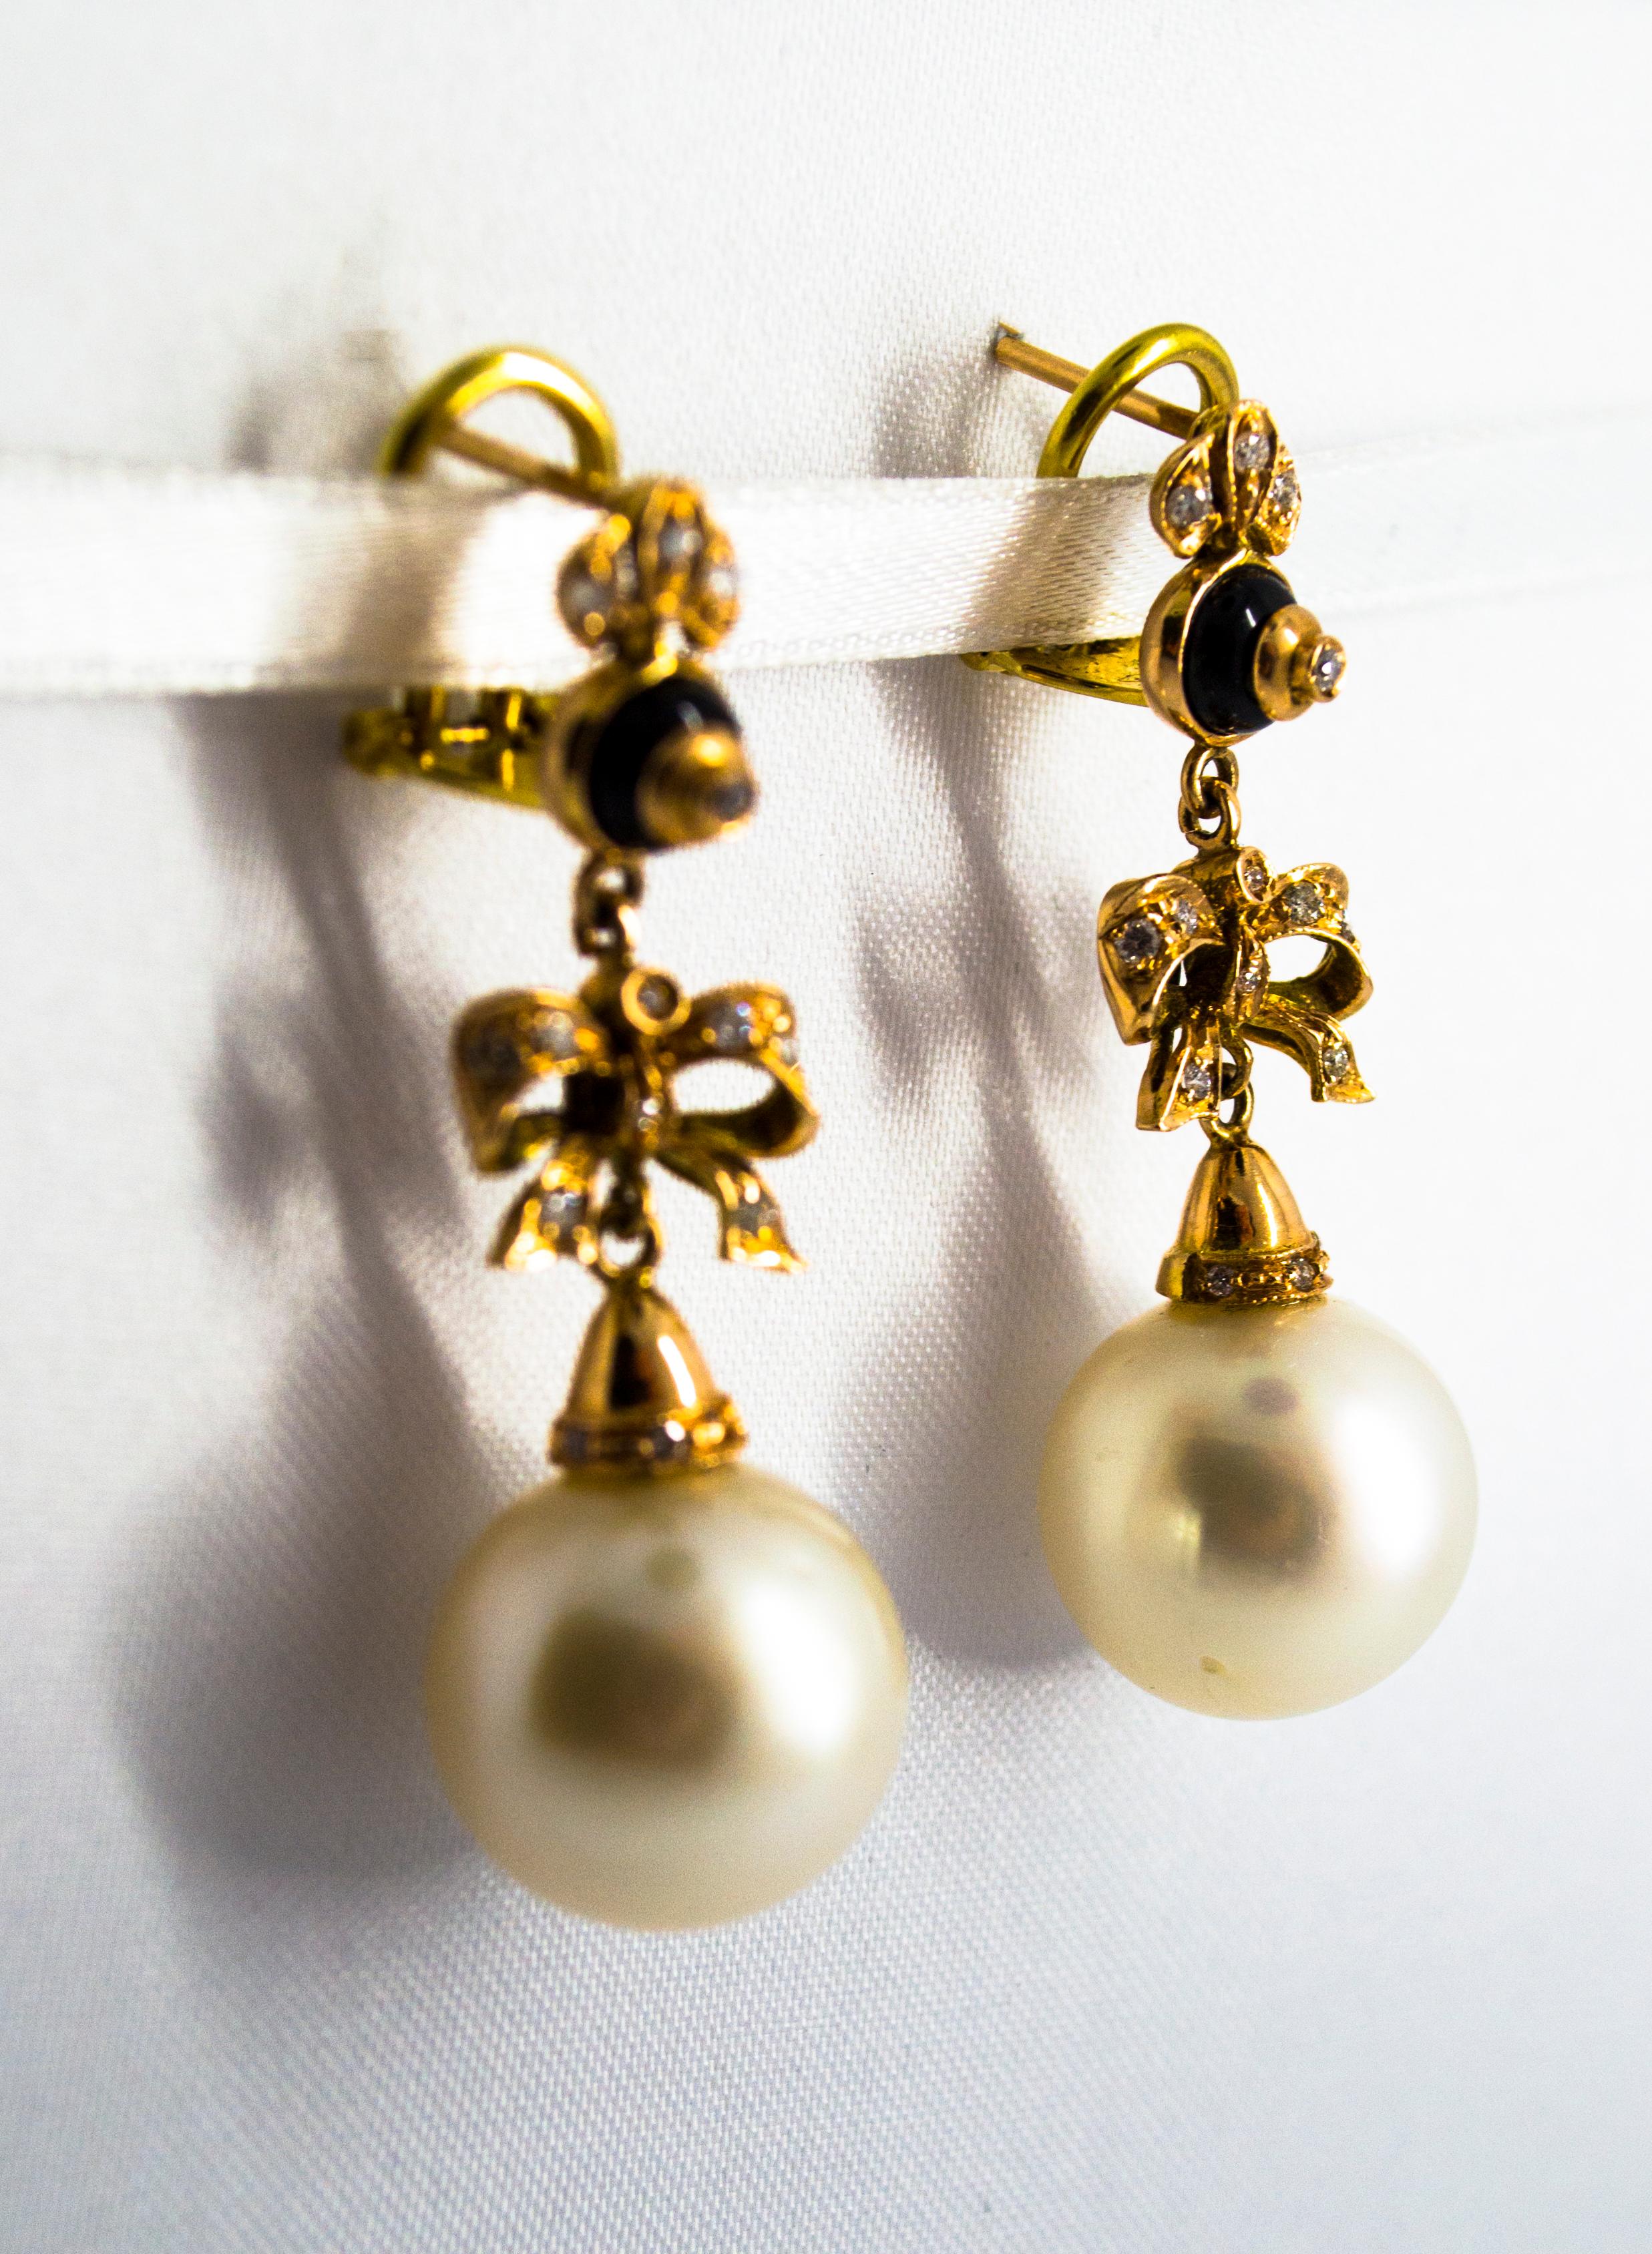 These Earrings are made of 14K Yellow Gold.
These Earrings have 0.50 Carat of White Diamonds.
These Earrings have also Onyx and 44.00 Carats of Australian Pearls.
All our Earrings have pins for pierced ears but we can change the closure and make any